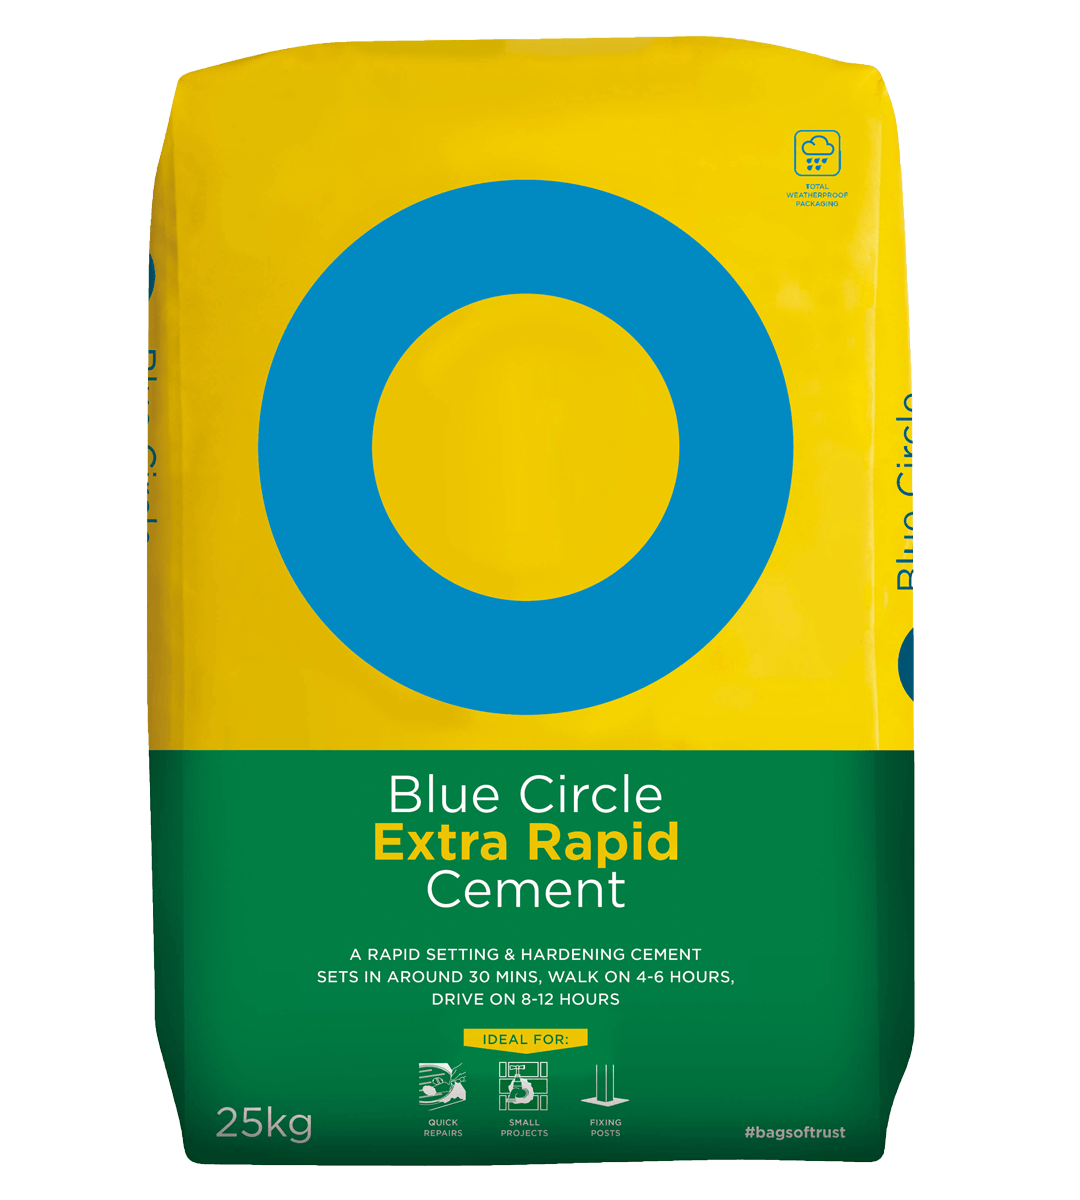 Four Blue Circle Company Logo - Blue Circle Cement for building trades